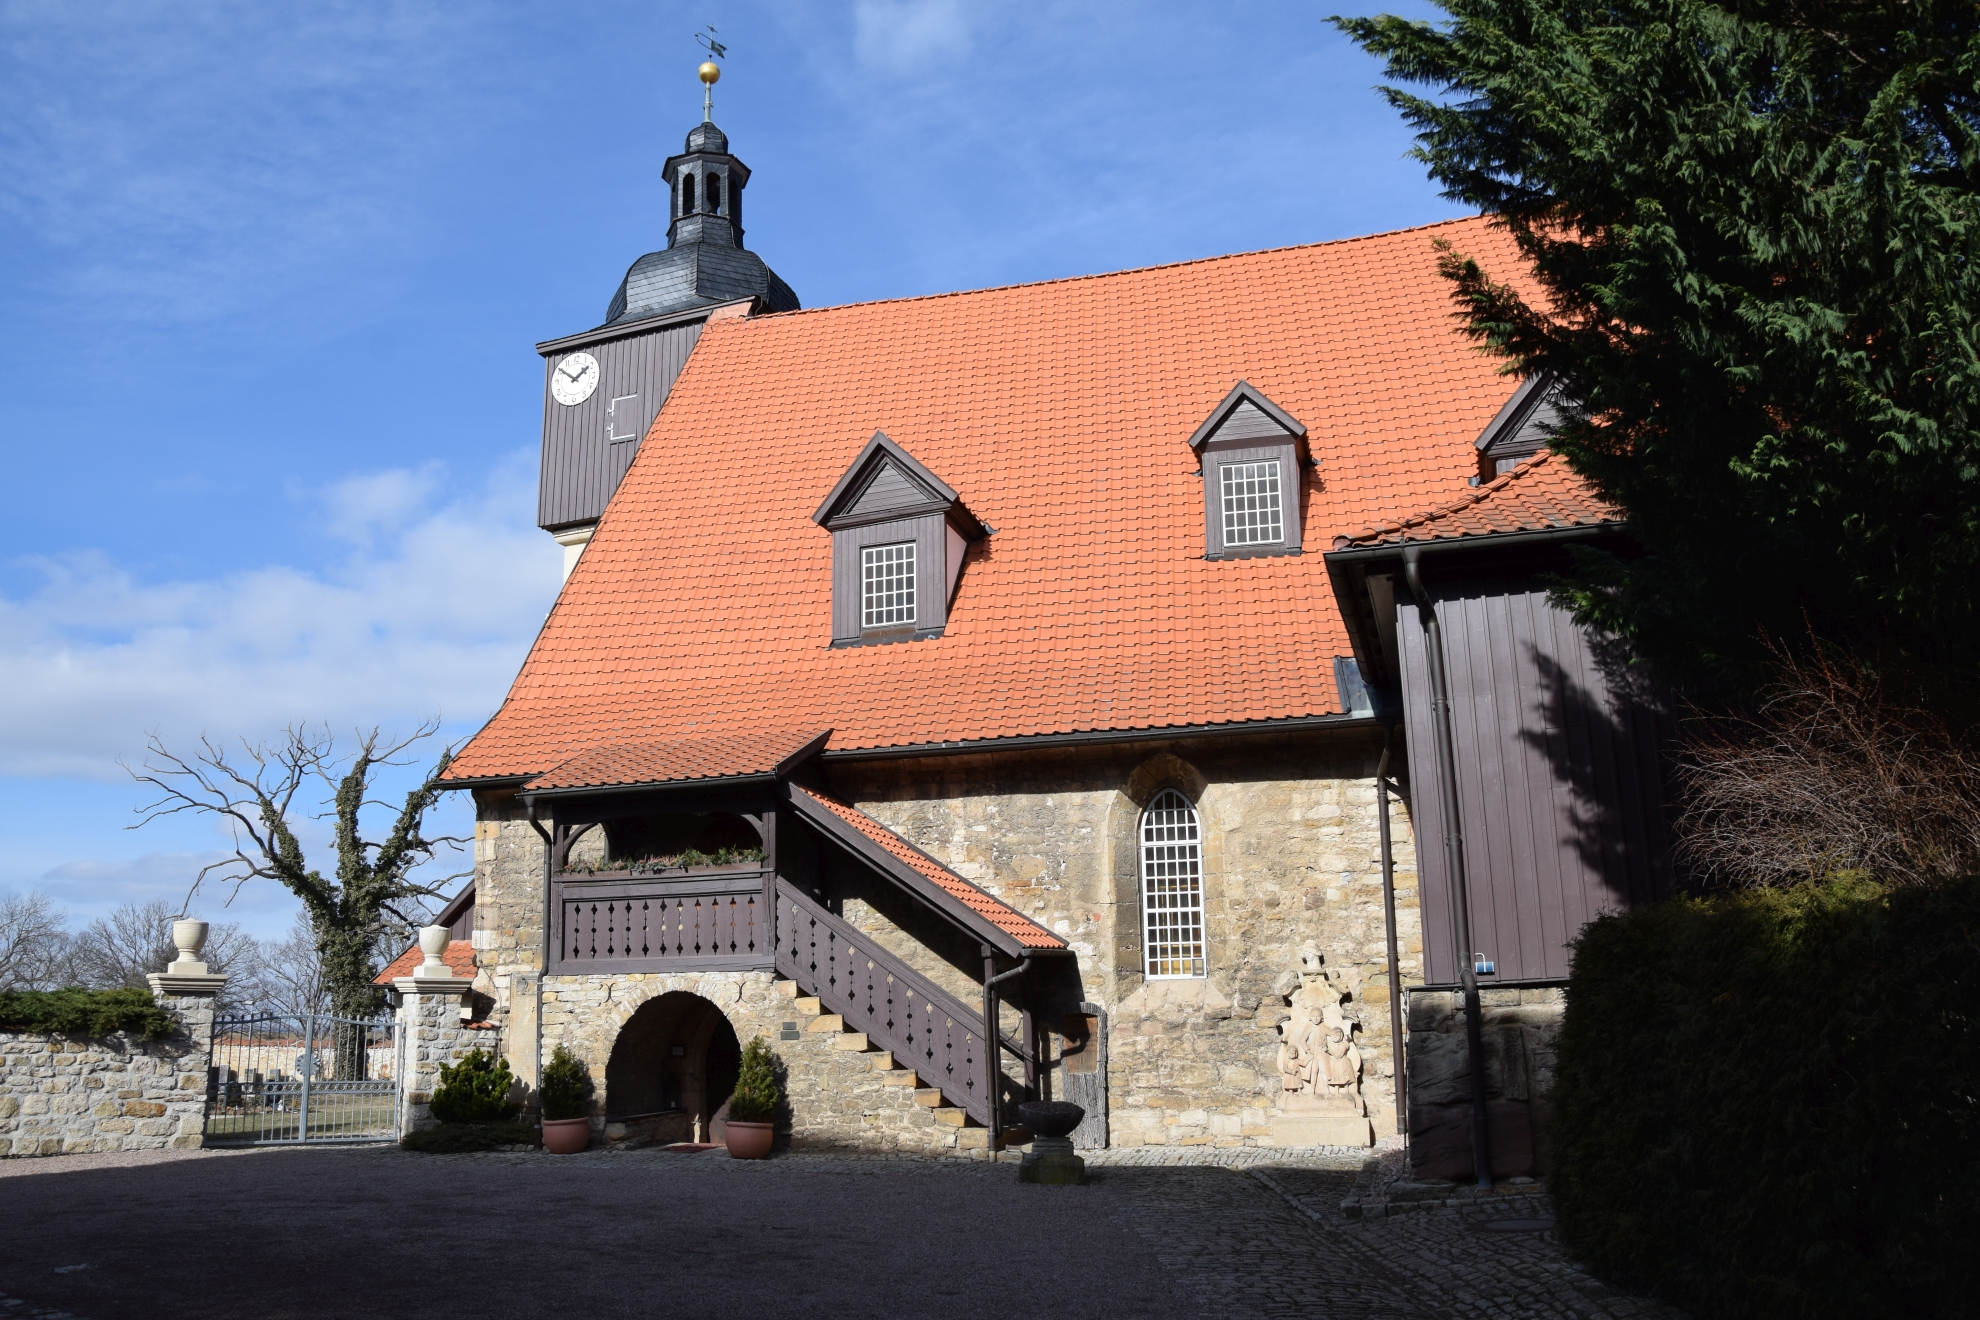 The St. Bartholomäikirche in Dornheim, where Der Herr denket an uns, BWV 196 was created in 1708. It is also the church where Bach married his first wife, Maria Barbara, in 1707.